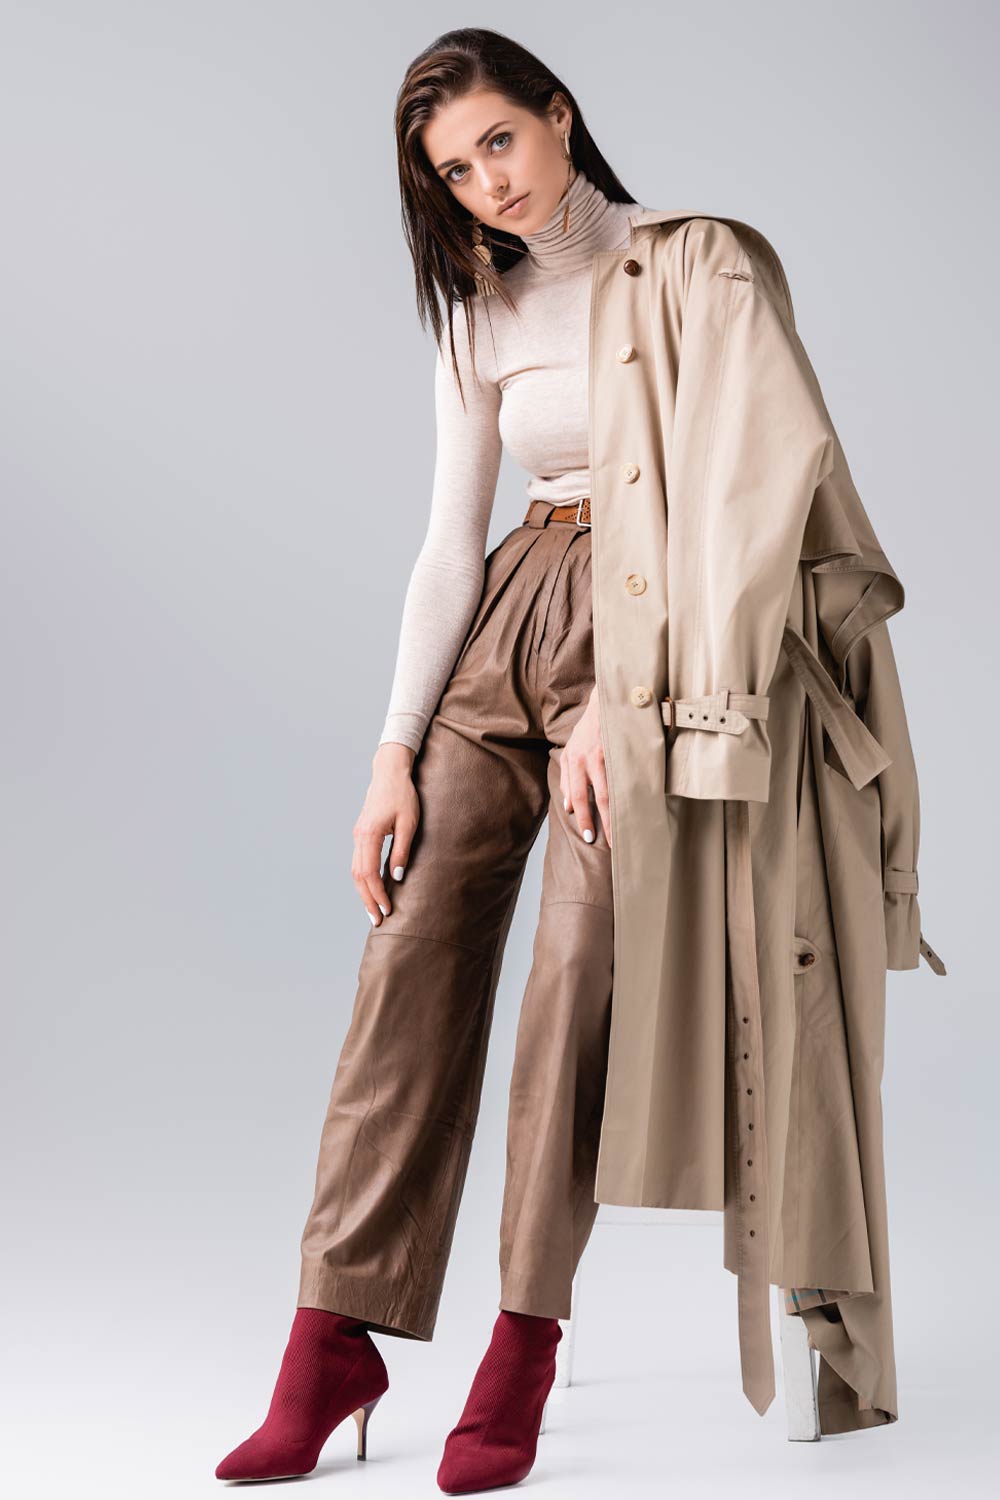 Versatile & Stylish Outfits With Long Trench Coat